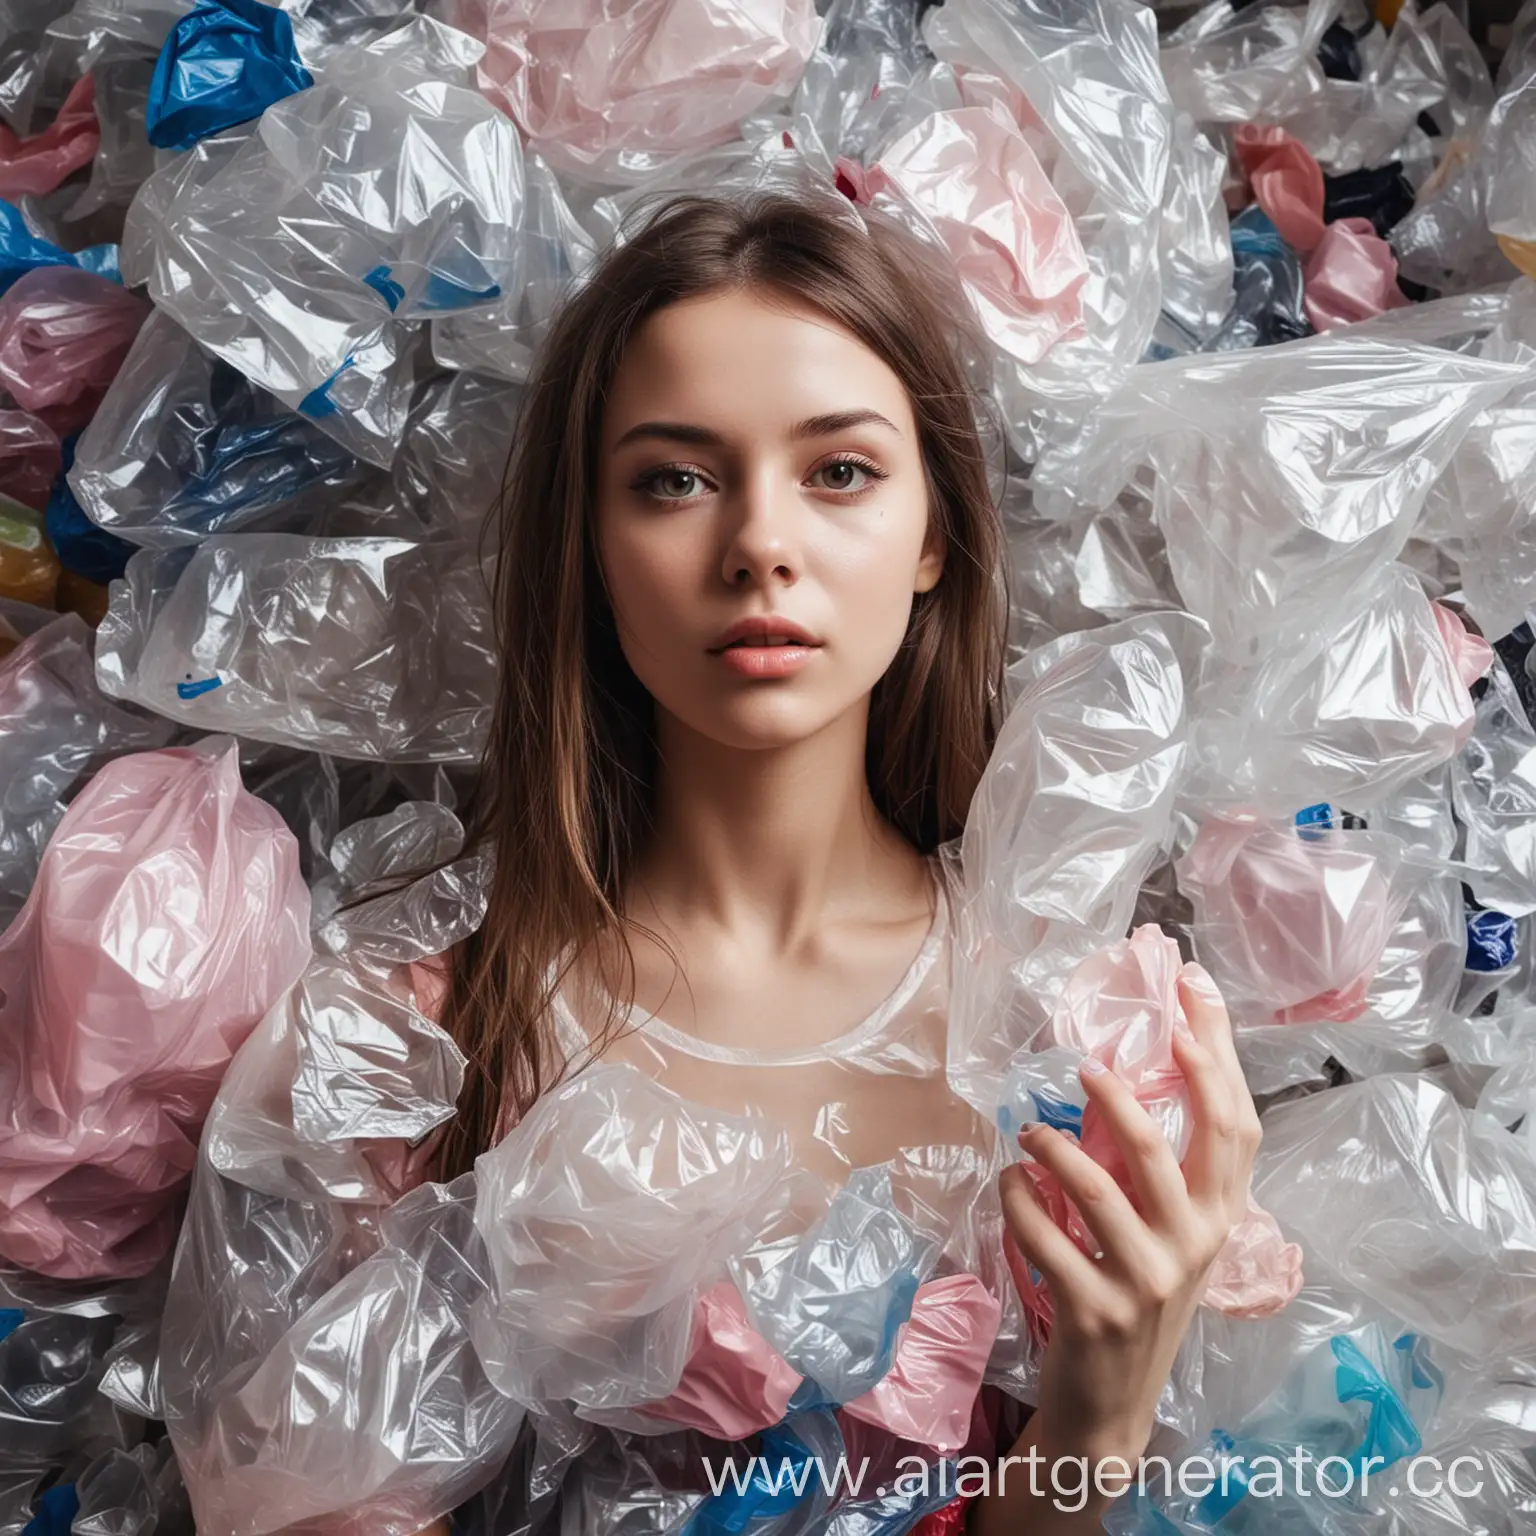 Playful-Girl-Surrounded-by-Colorful-Plastic-Toys